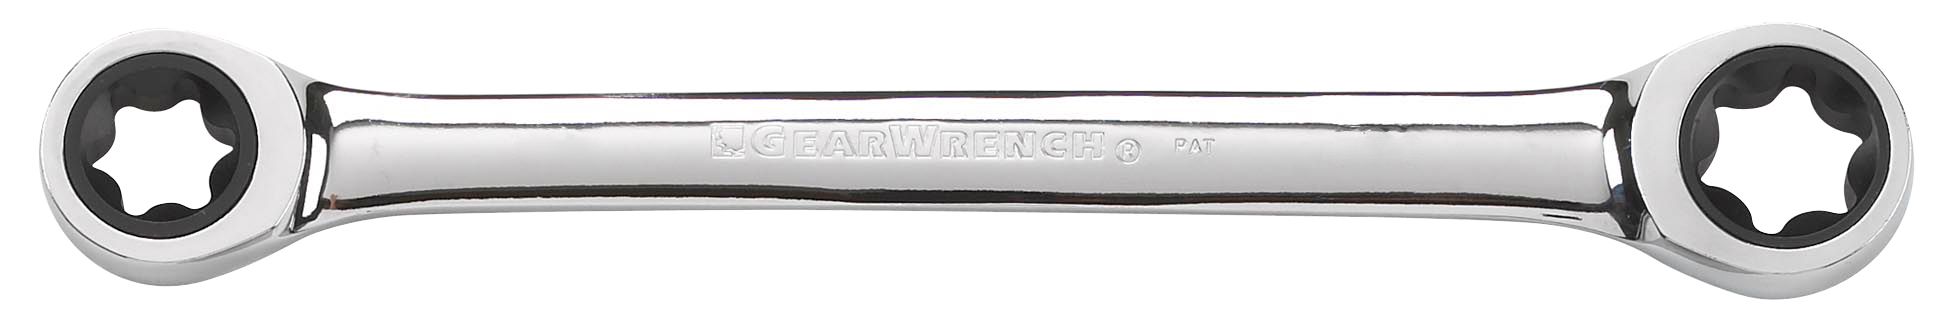 GearWrench E10 x E12 Torx Box-End Wrench, Ratcheting